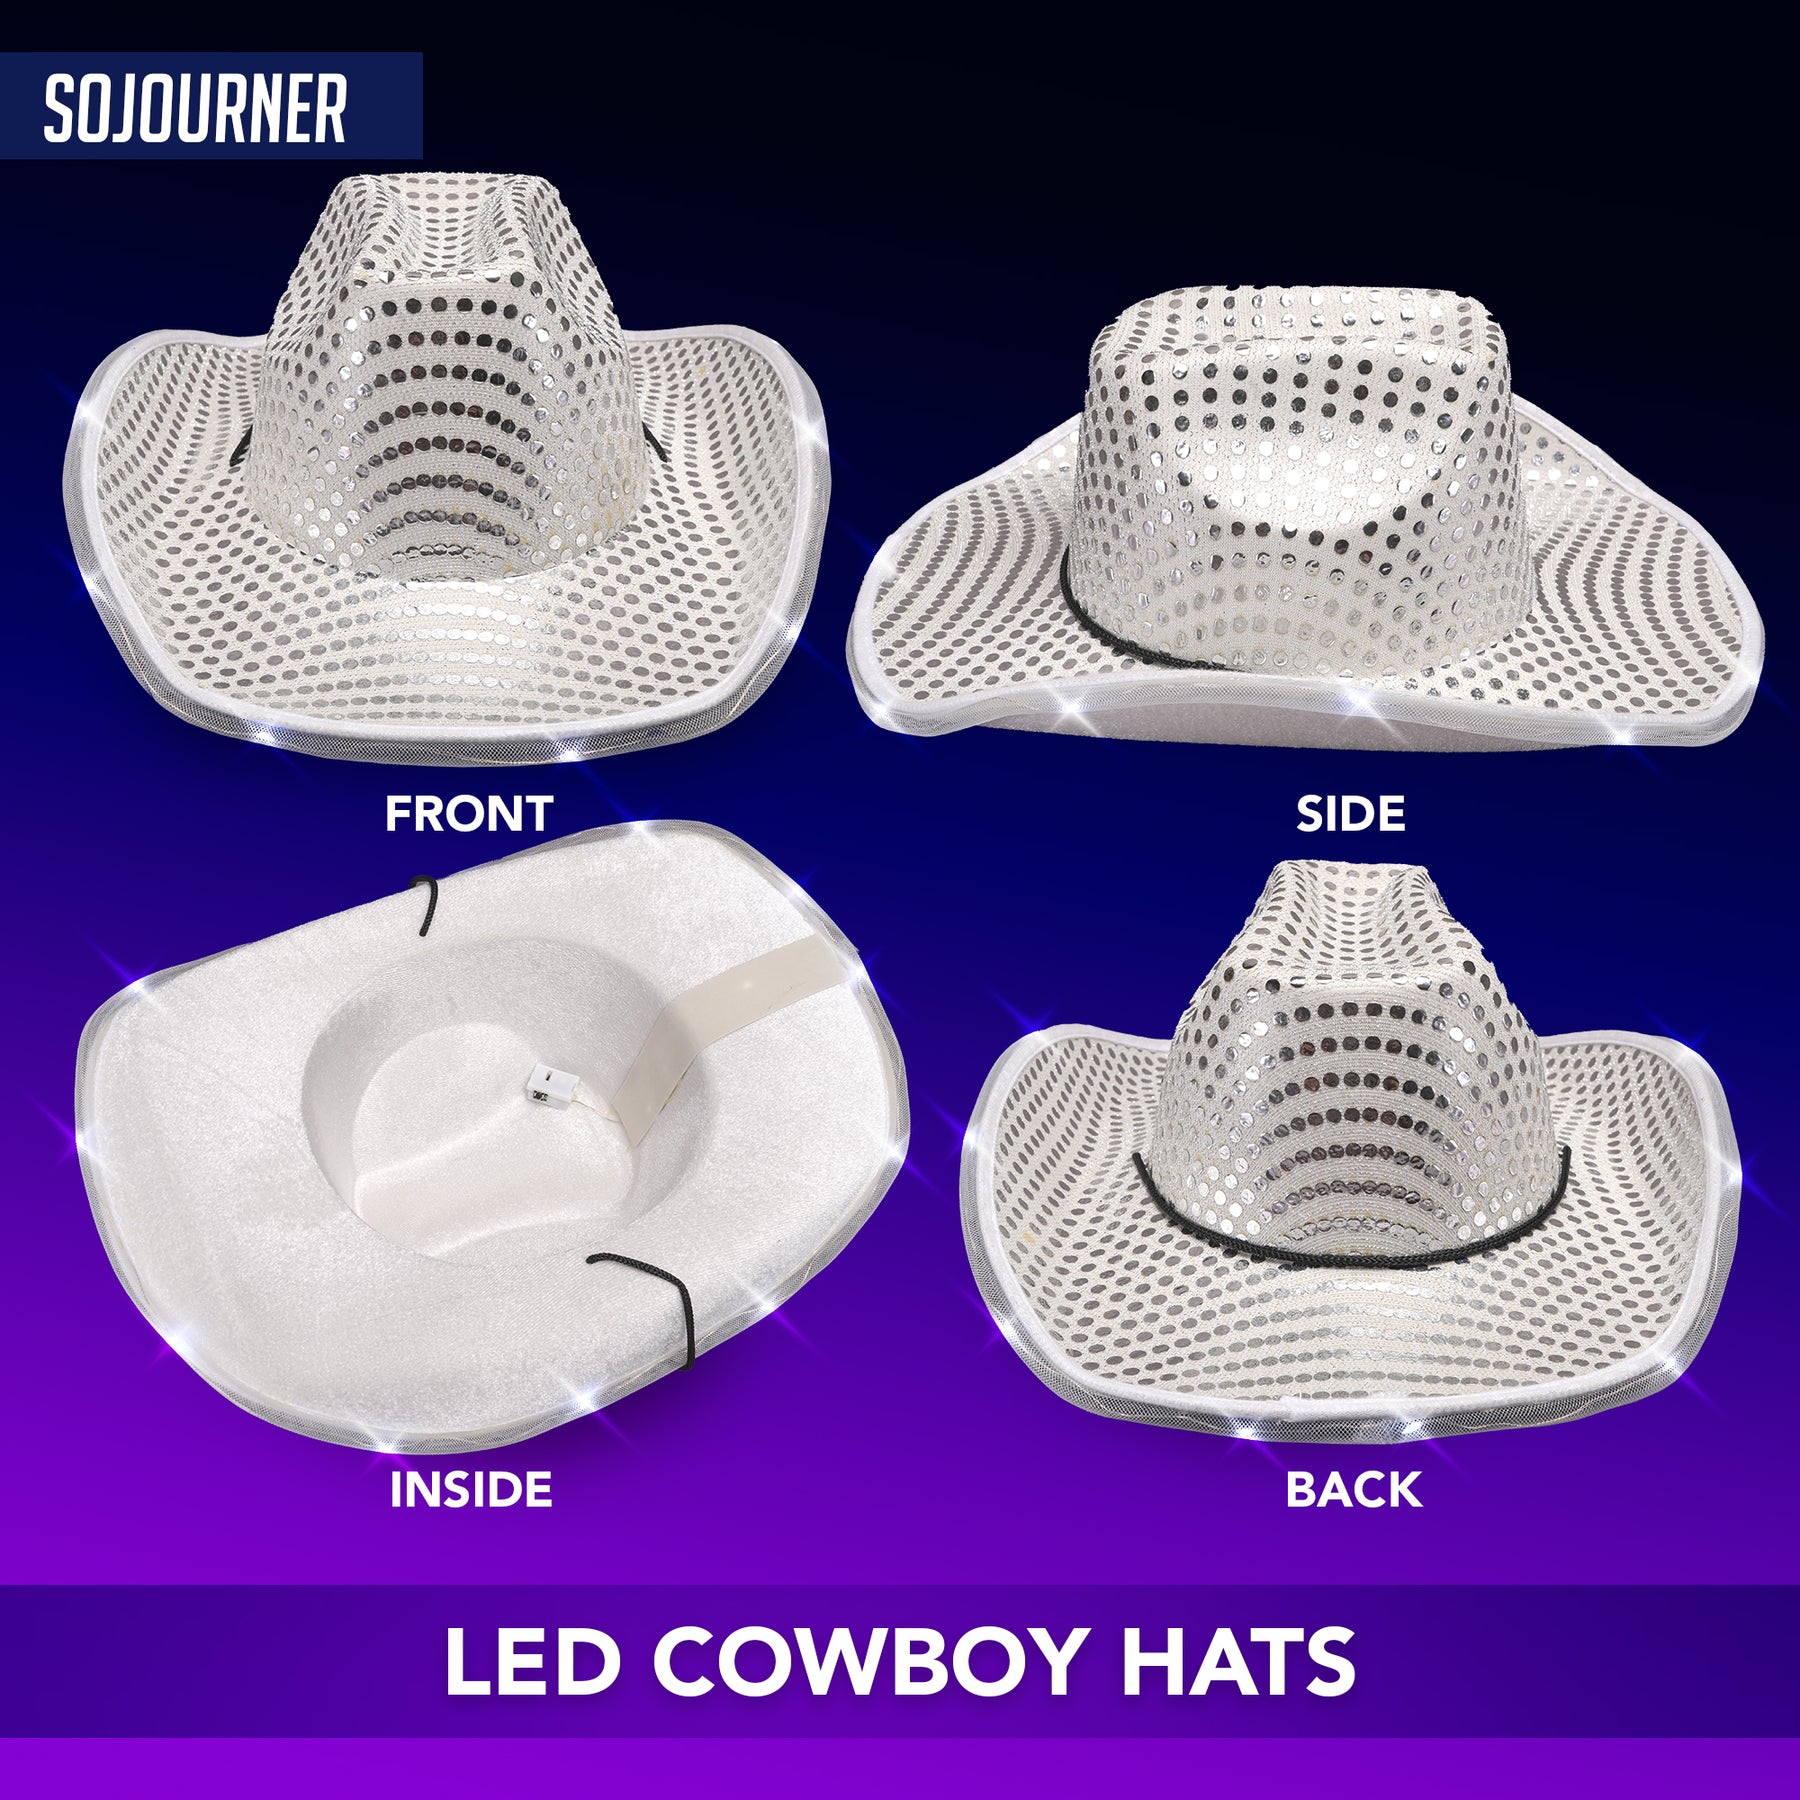 Silver LED Sequin Light Up Cowgirl Hat - LED Cowboy Hat for Bachelorette Parties, Halloween and More - Neon Cowboy Hat Light Up for all Occasions